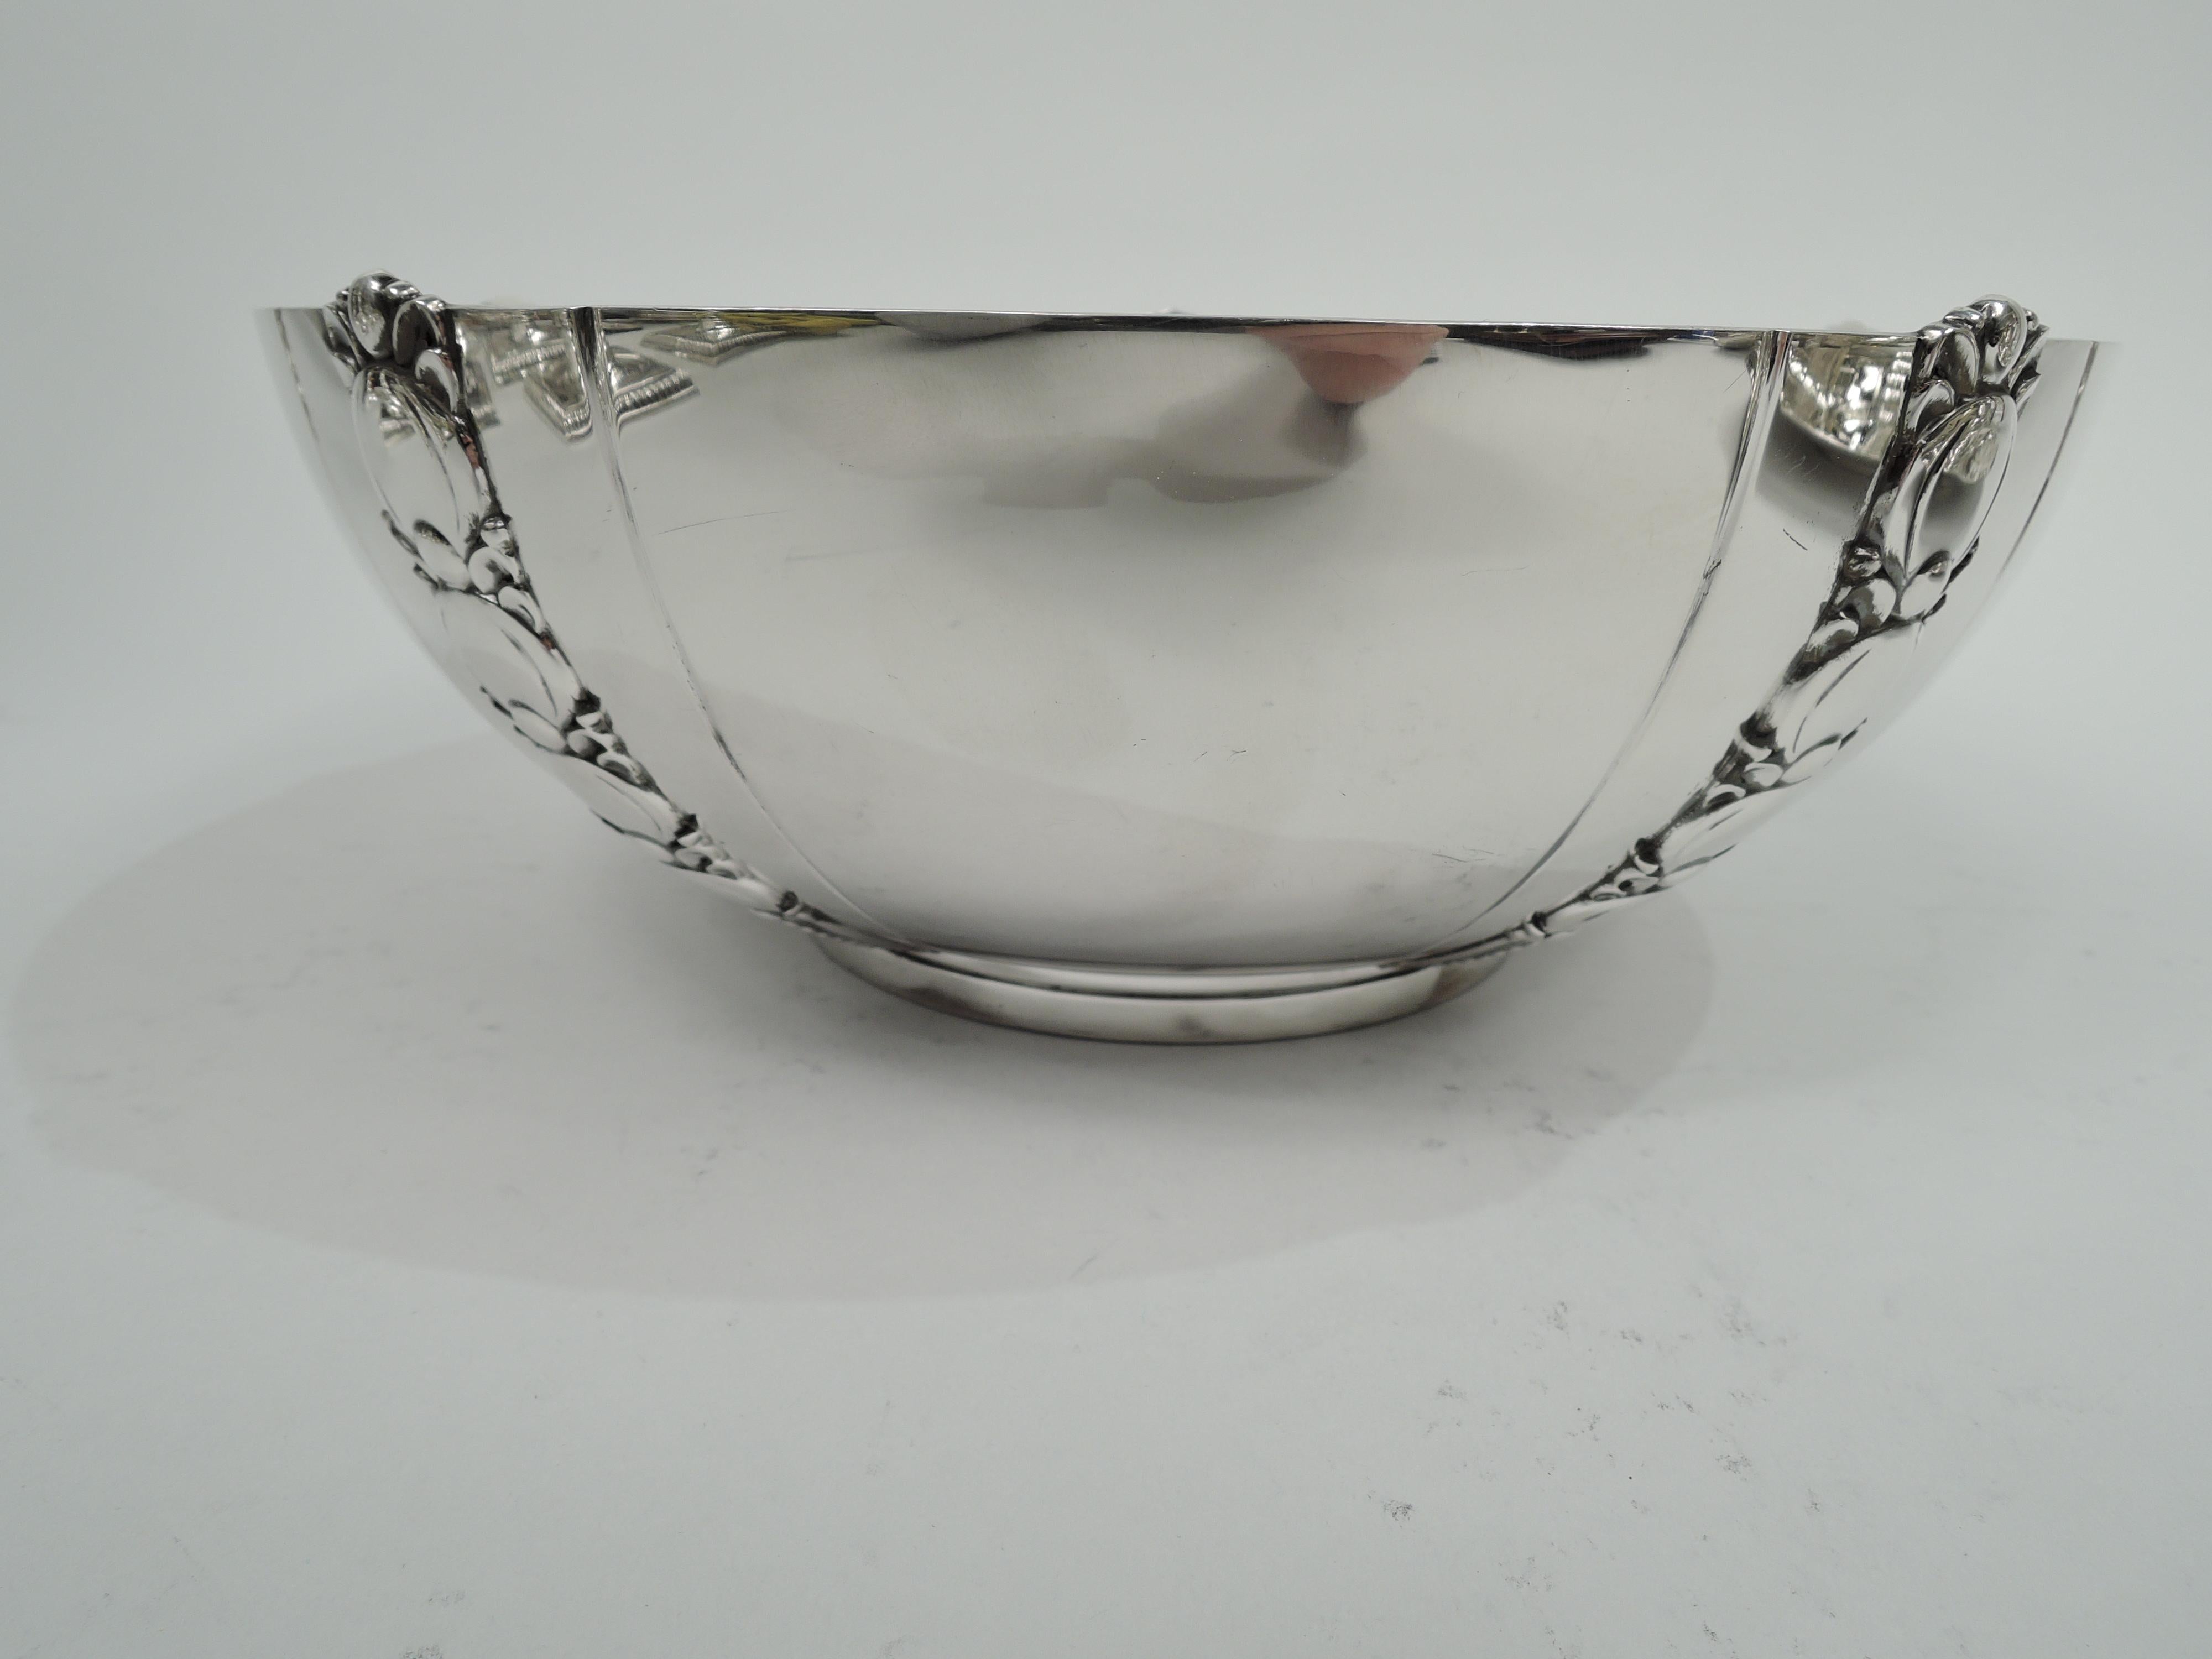 20th Century Tiffany American Art Deco Sterling Silver Tomato Bowl on Stand